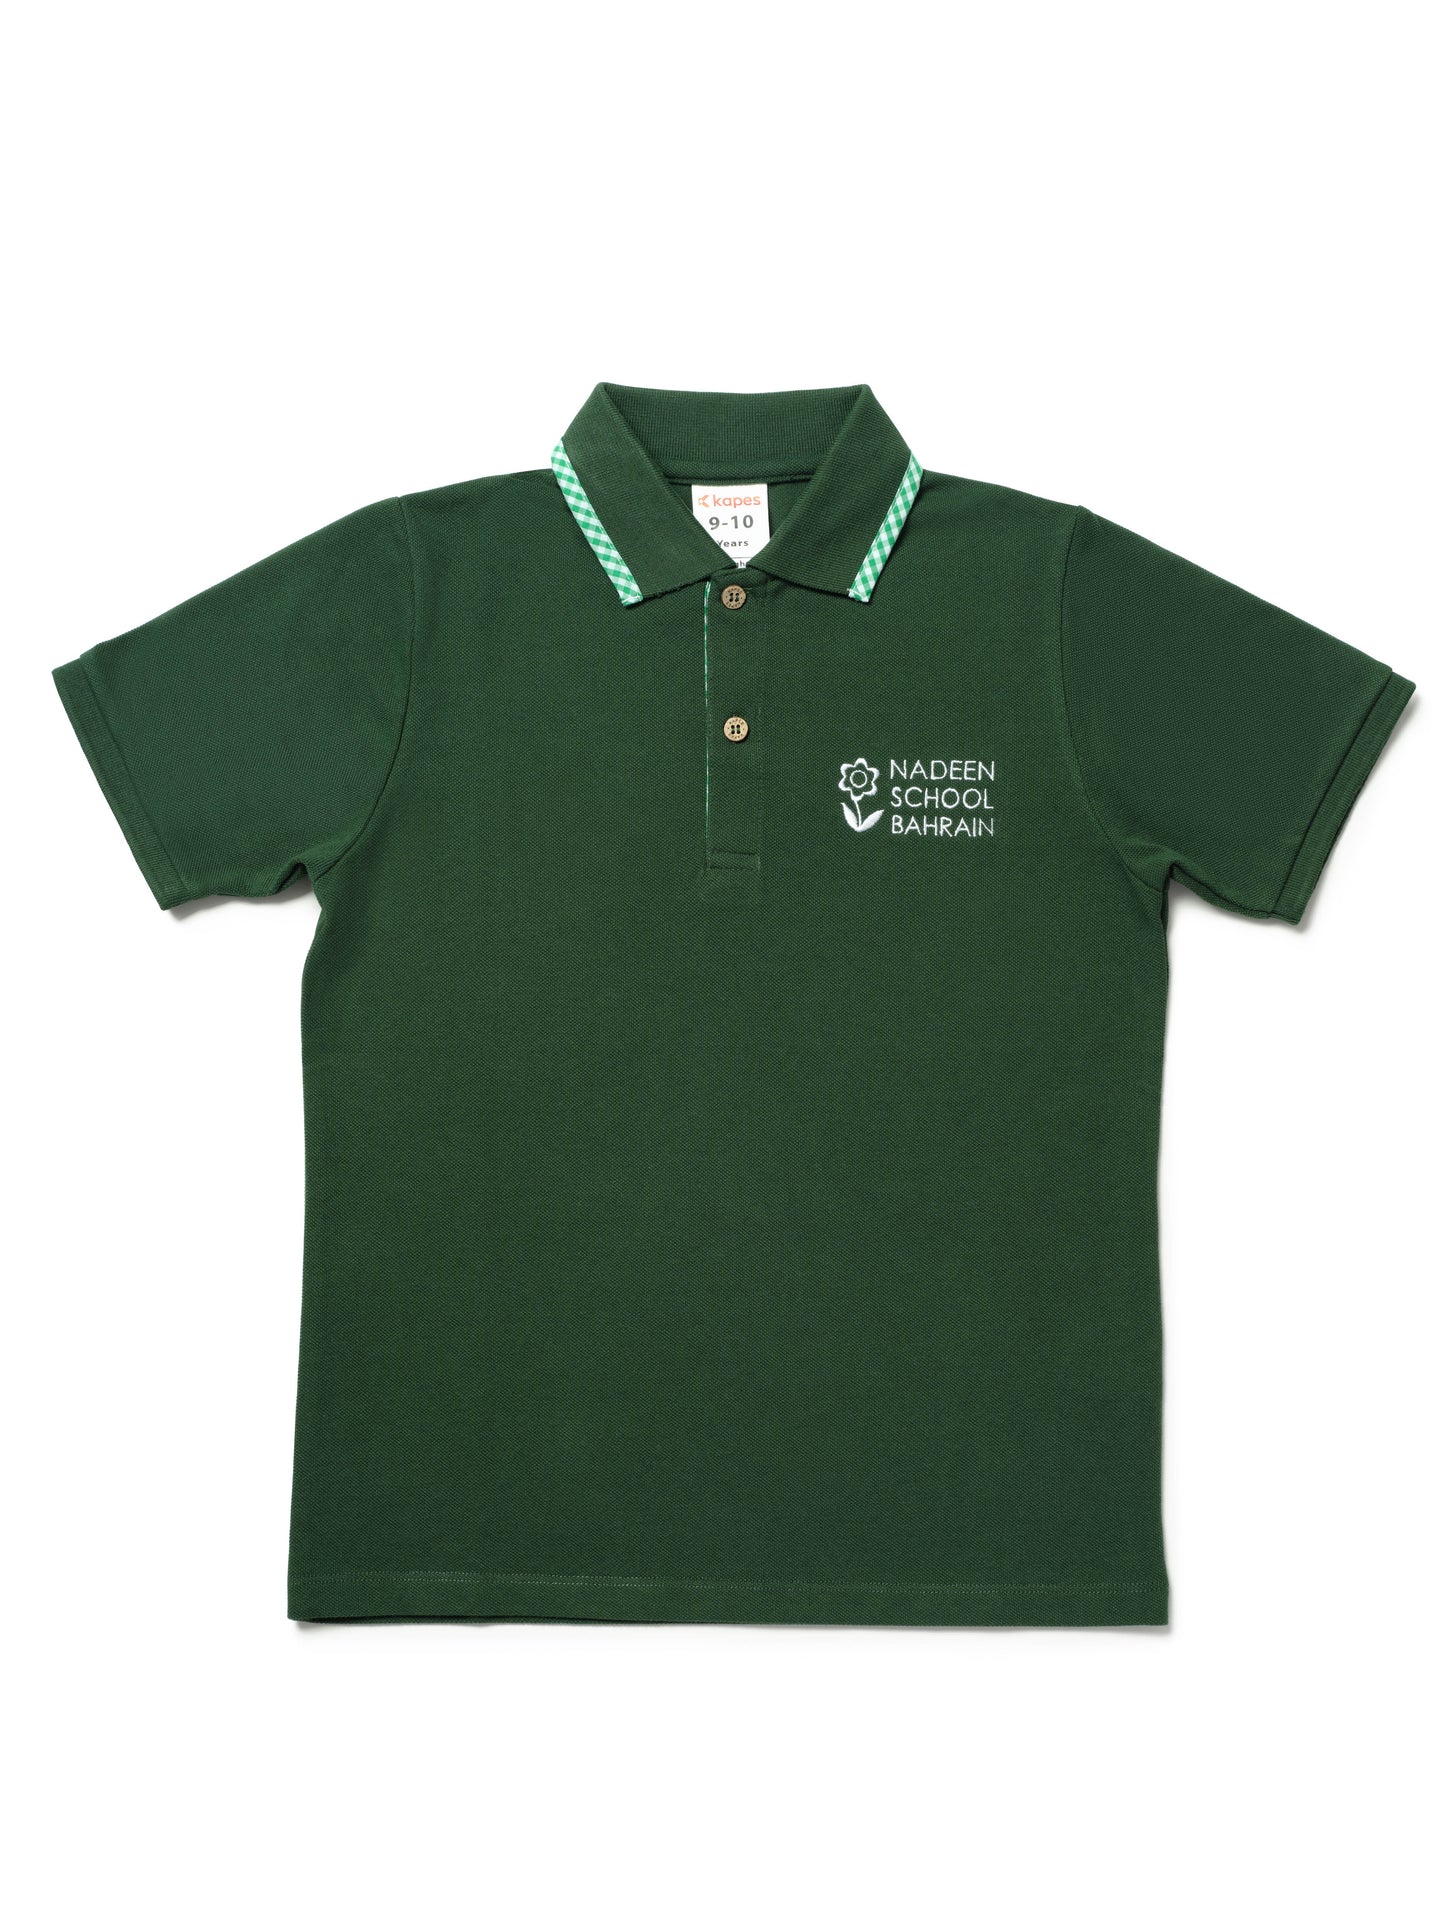 Early Years & Primary Polo